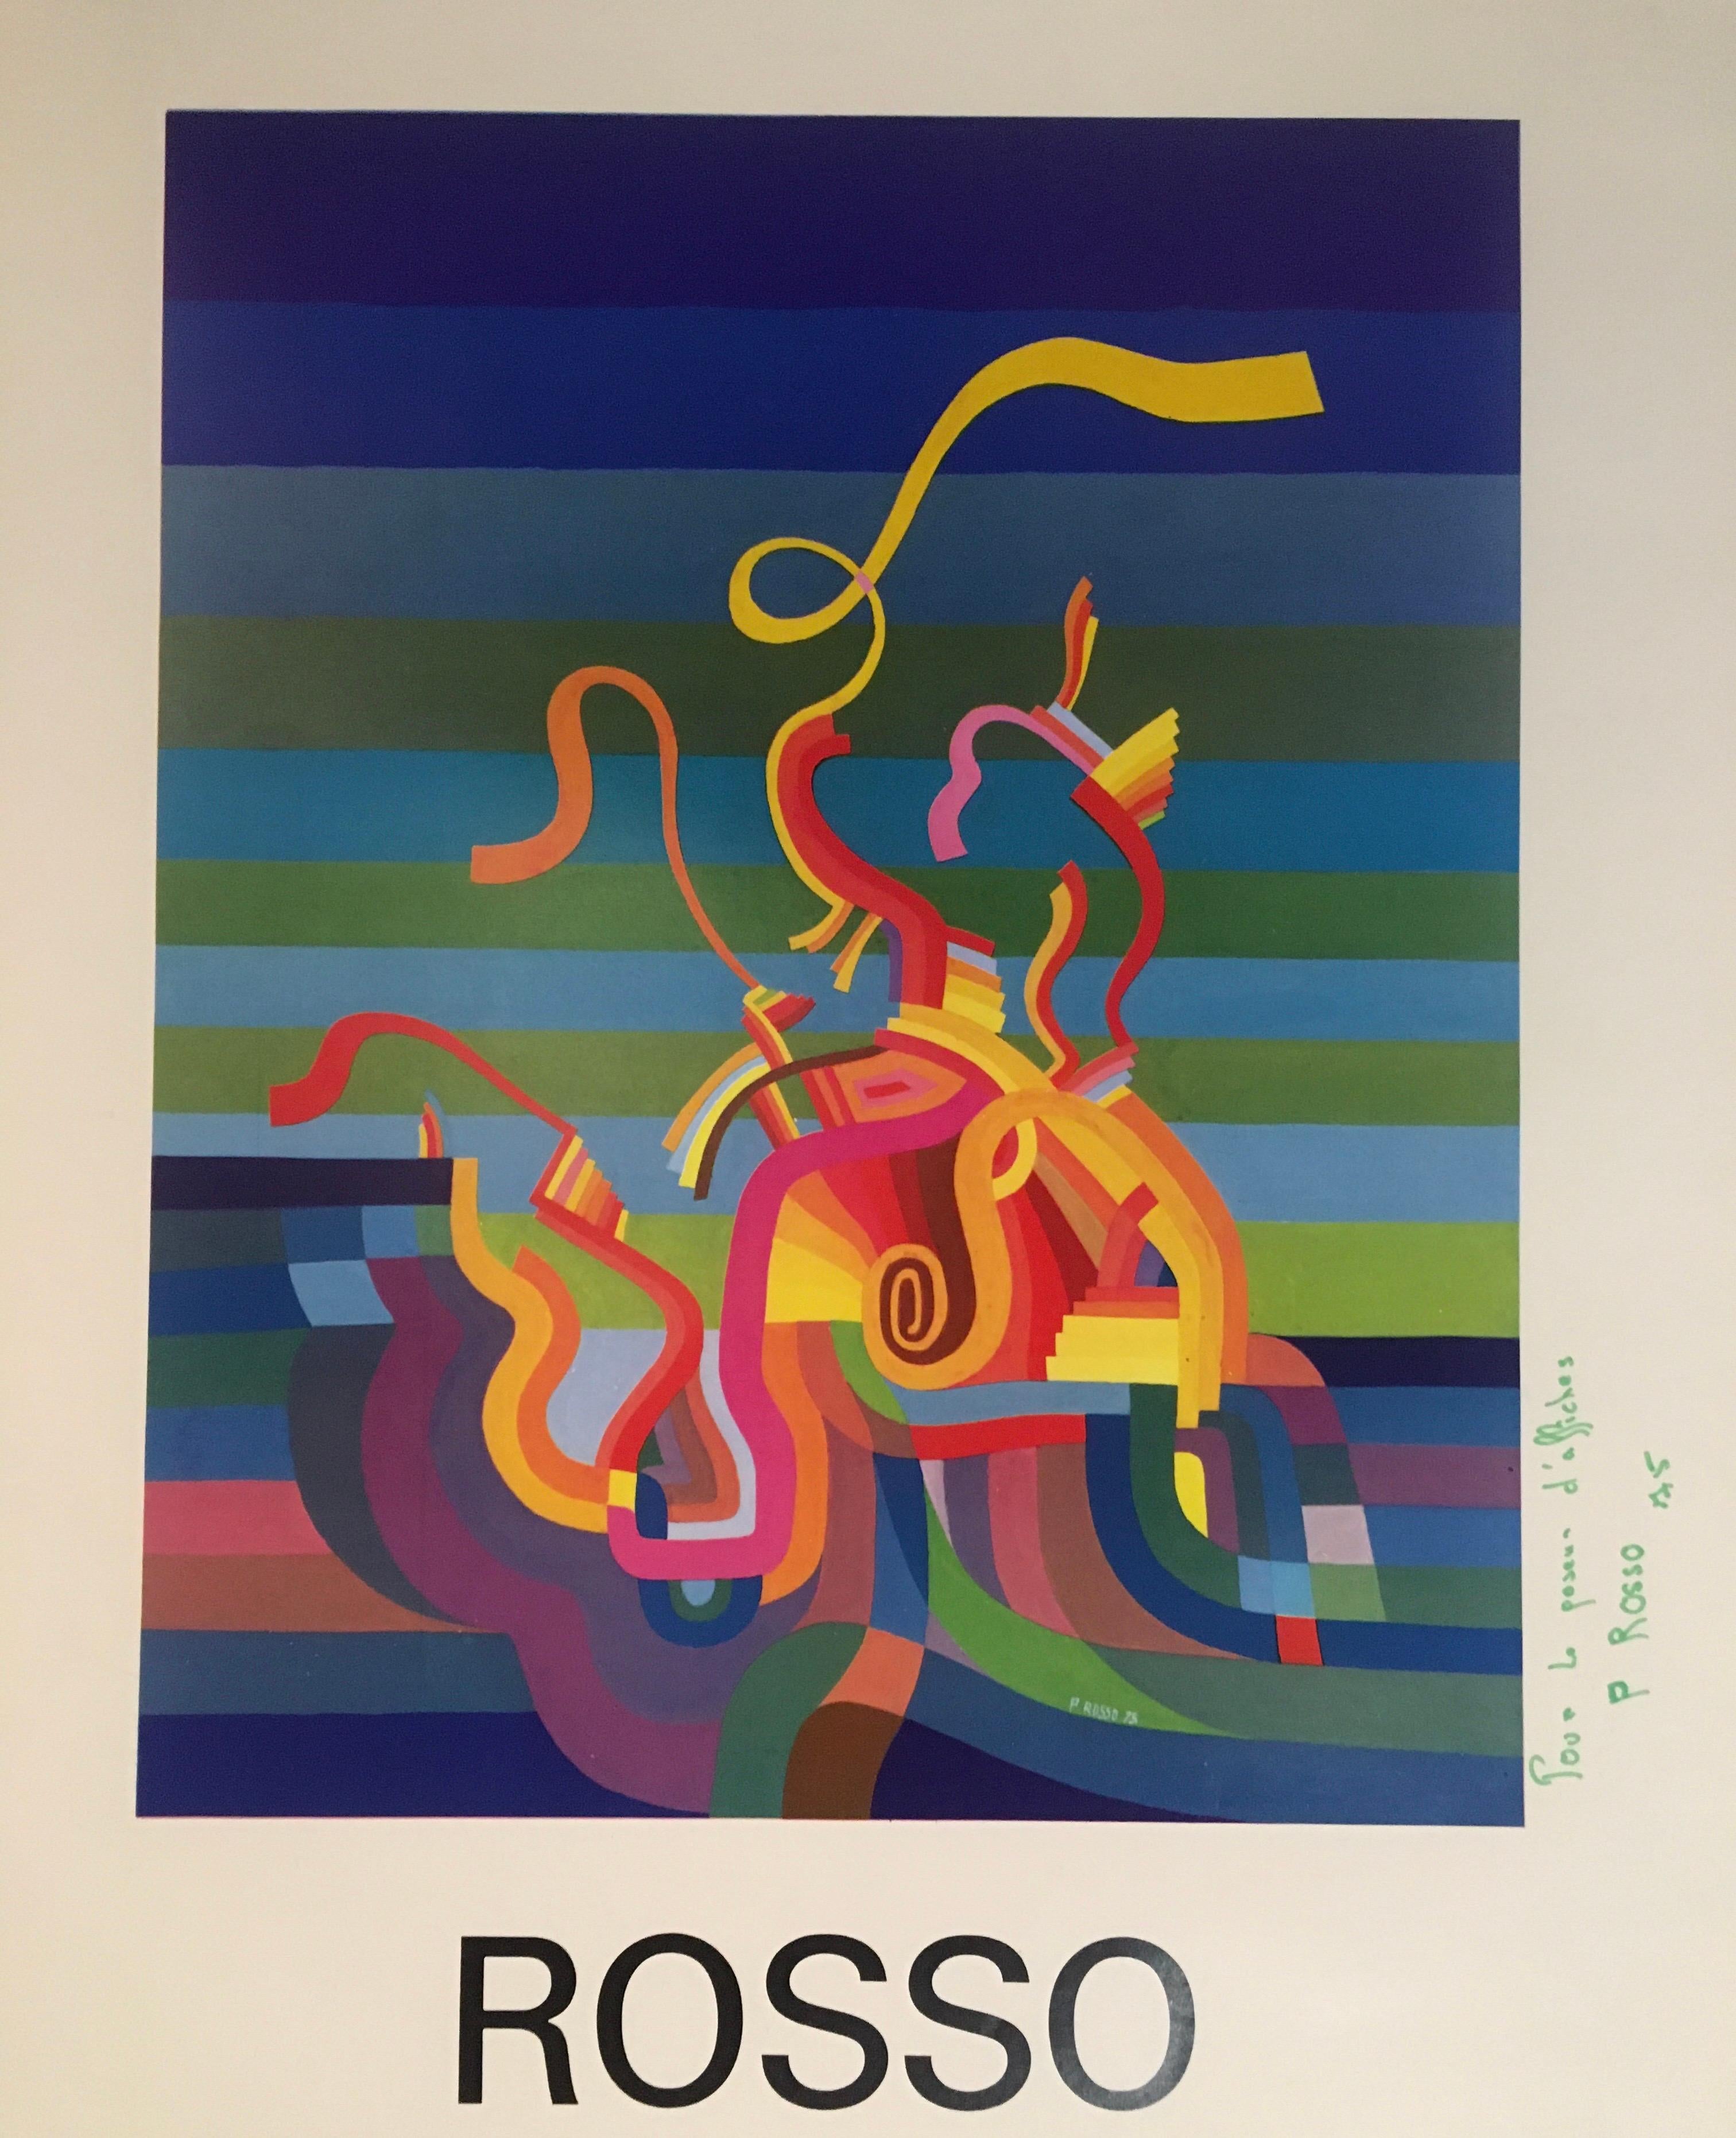 Original midcentury abstract art exhibition poster with wonderful vivid colors of blue, red, green, beige, etc...
Very decorative, signed by the artist and dated 1975.

Measures: 18